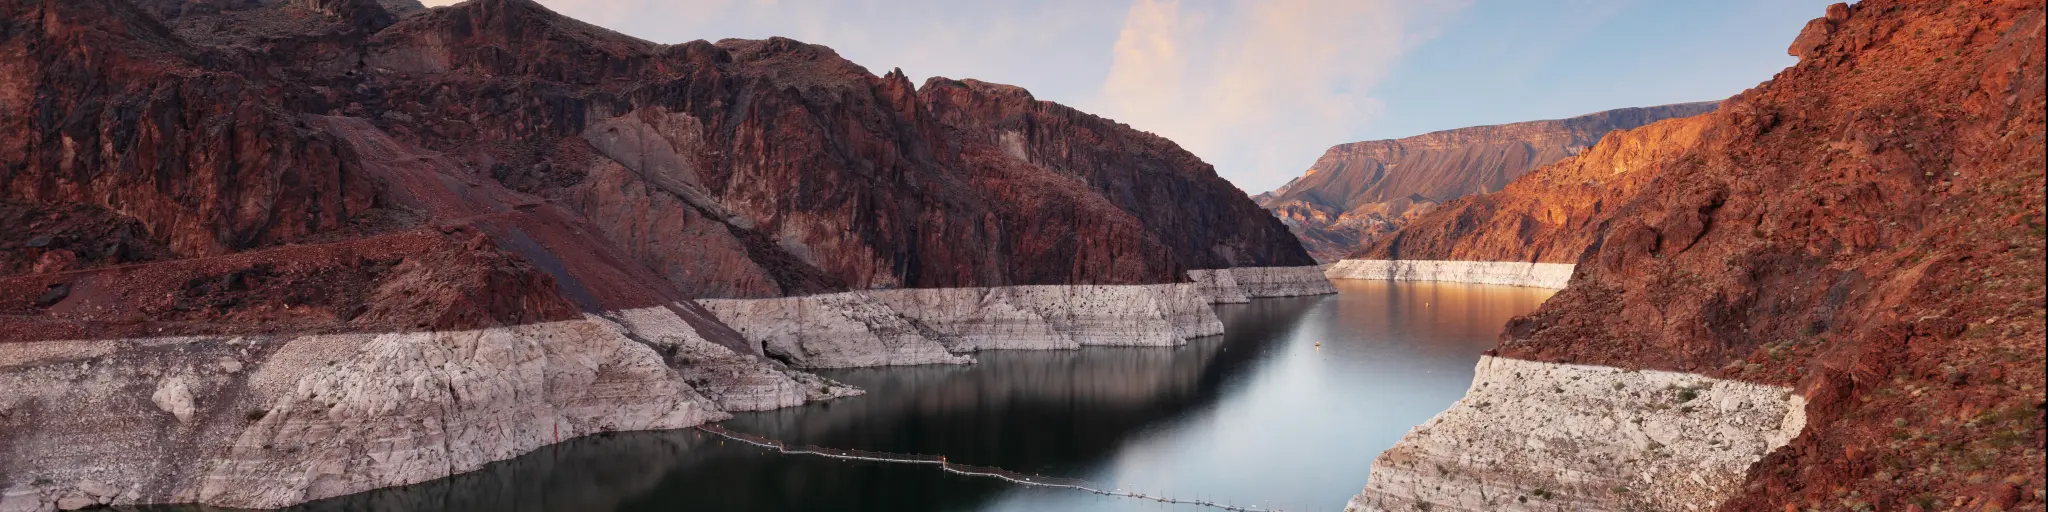 Lake Mead, Nevada/Arizona, USA with a view of Colorado River and taken at dusk.